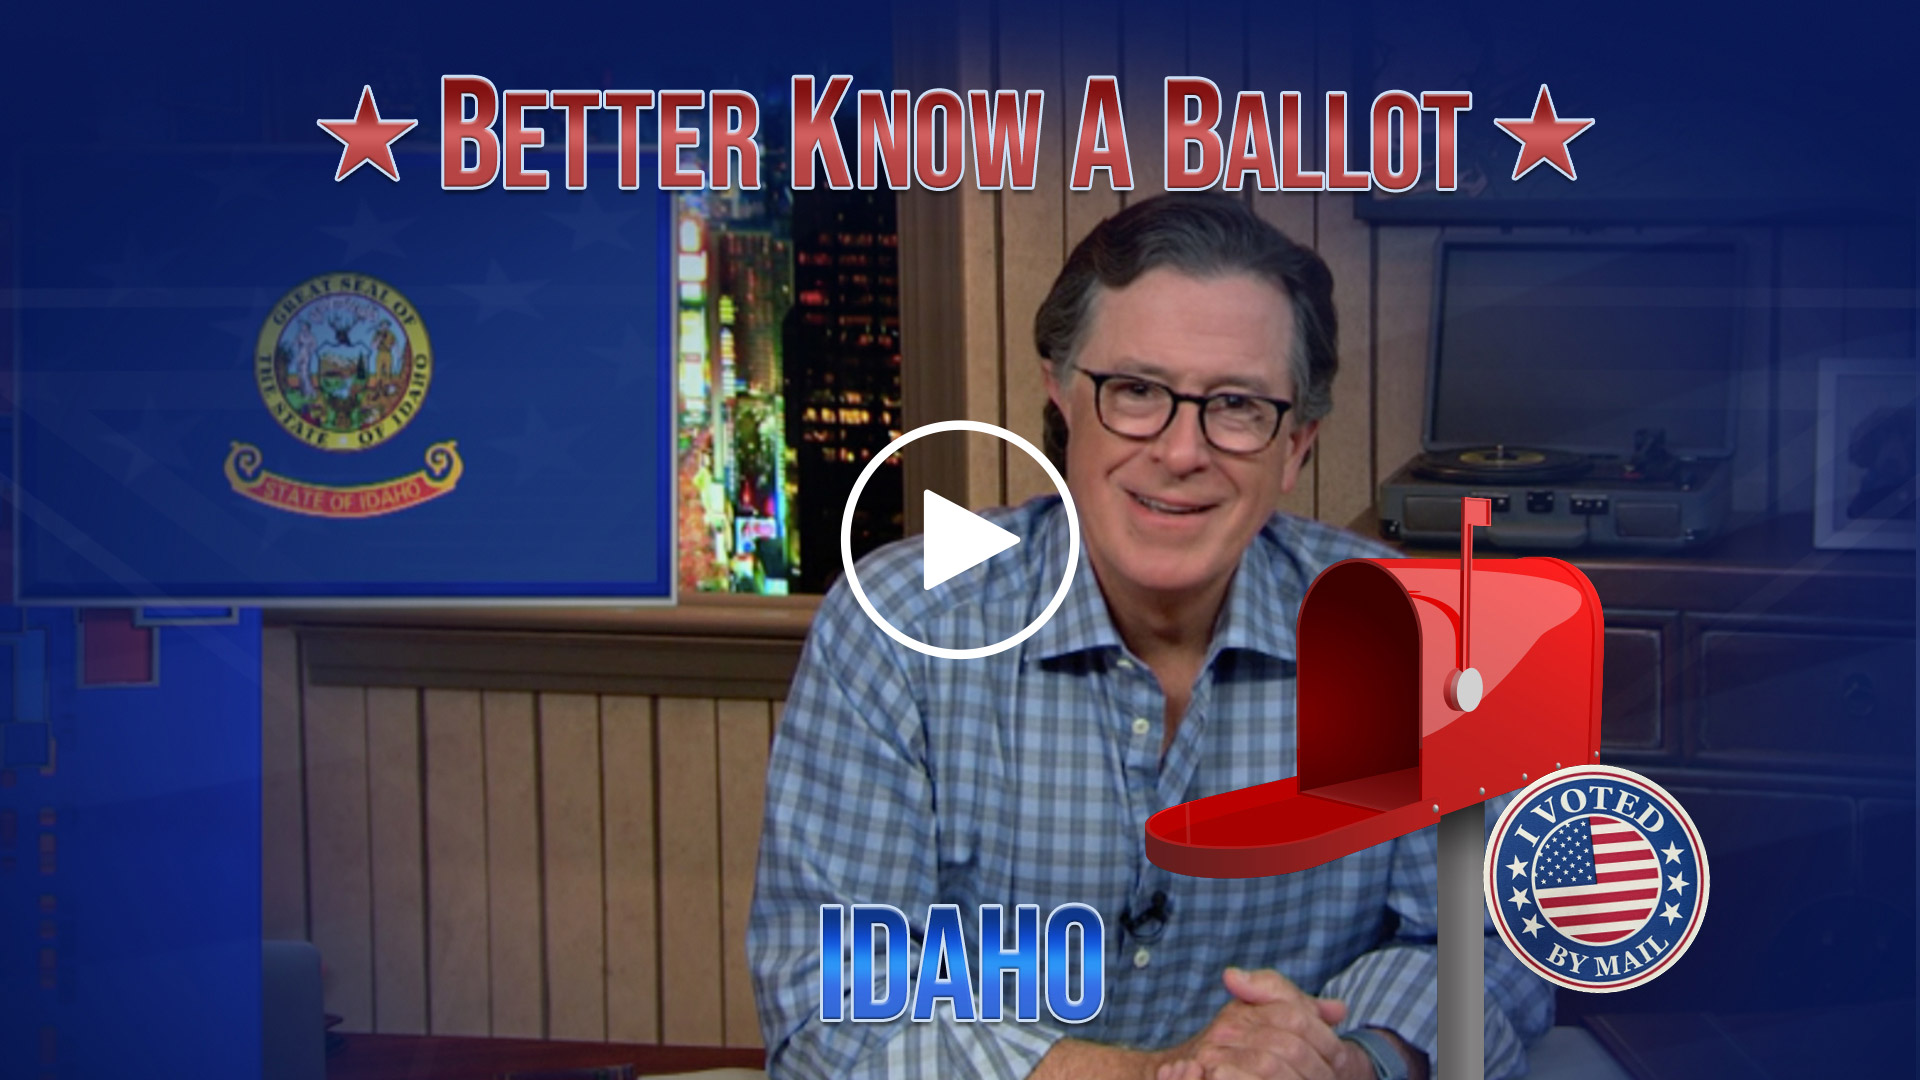 A MESSAGE FROM STEPHEN COLBERT FOR THE 2020 ELECTION.